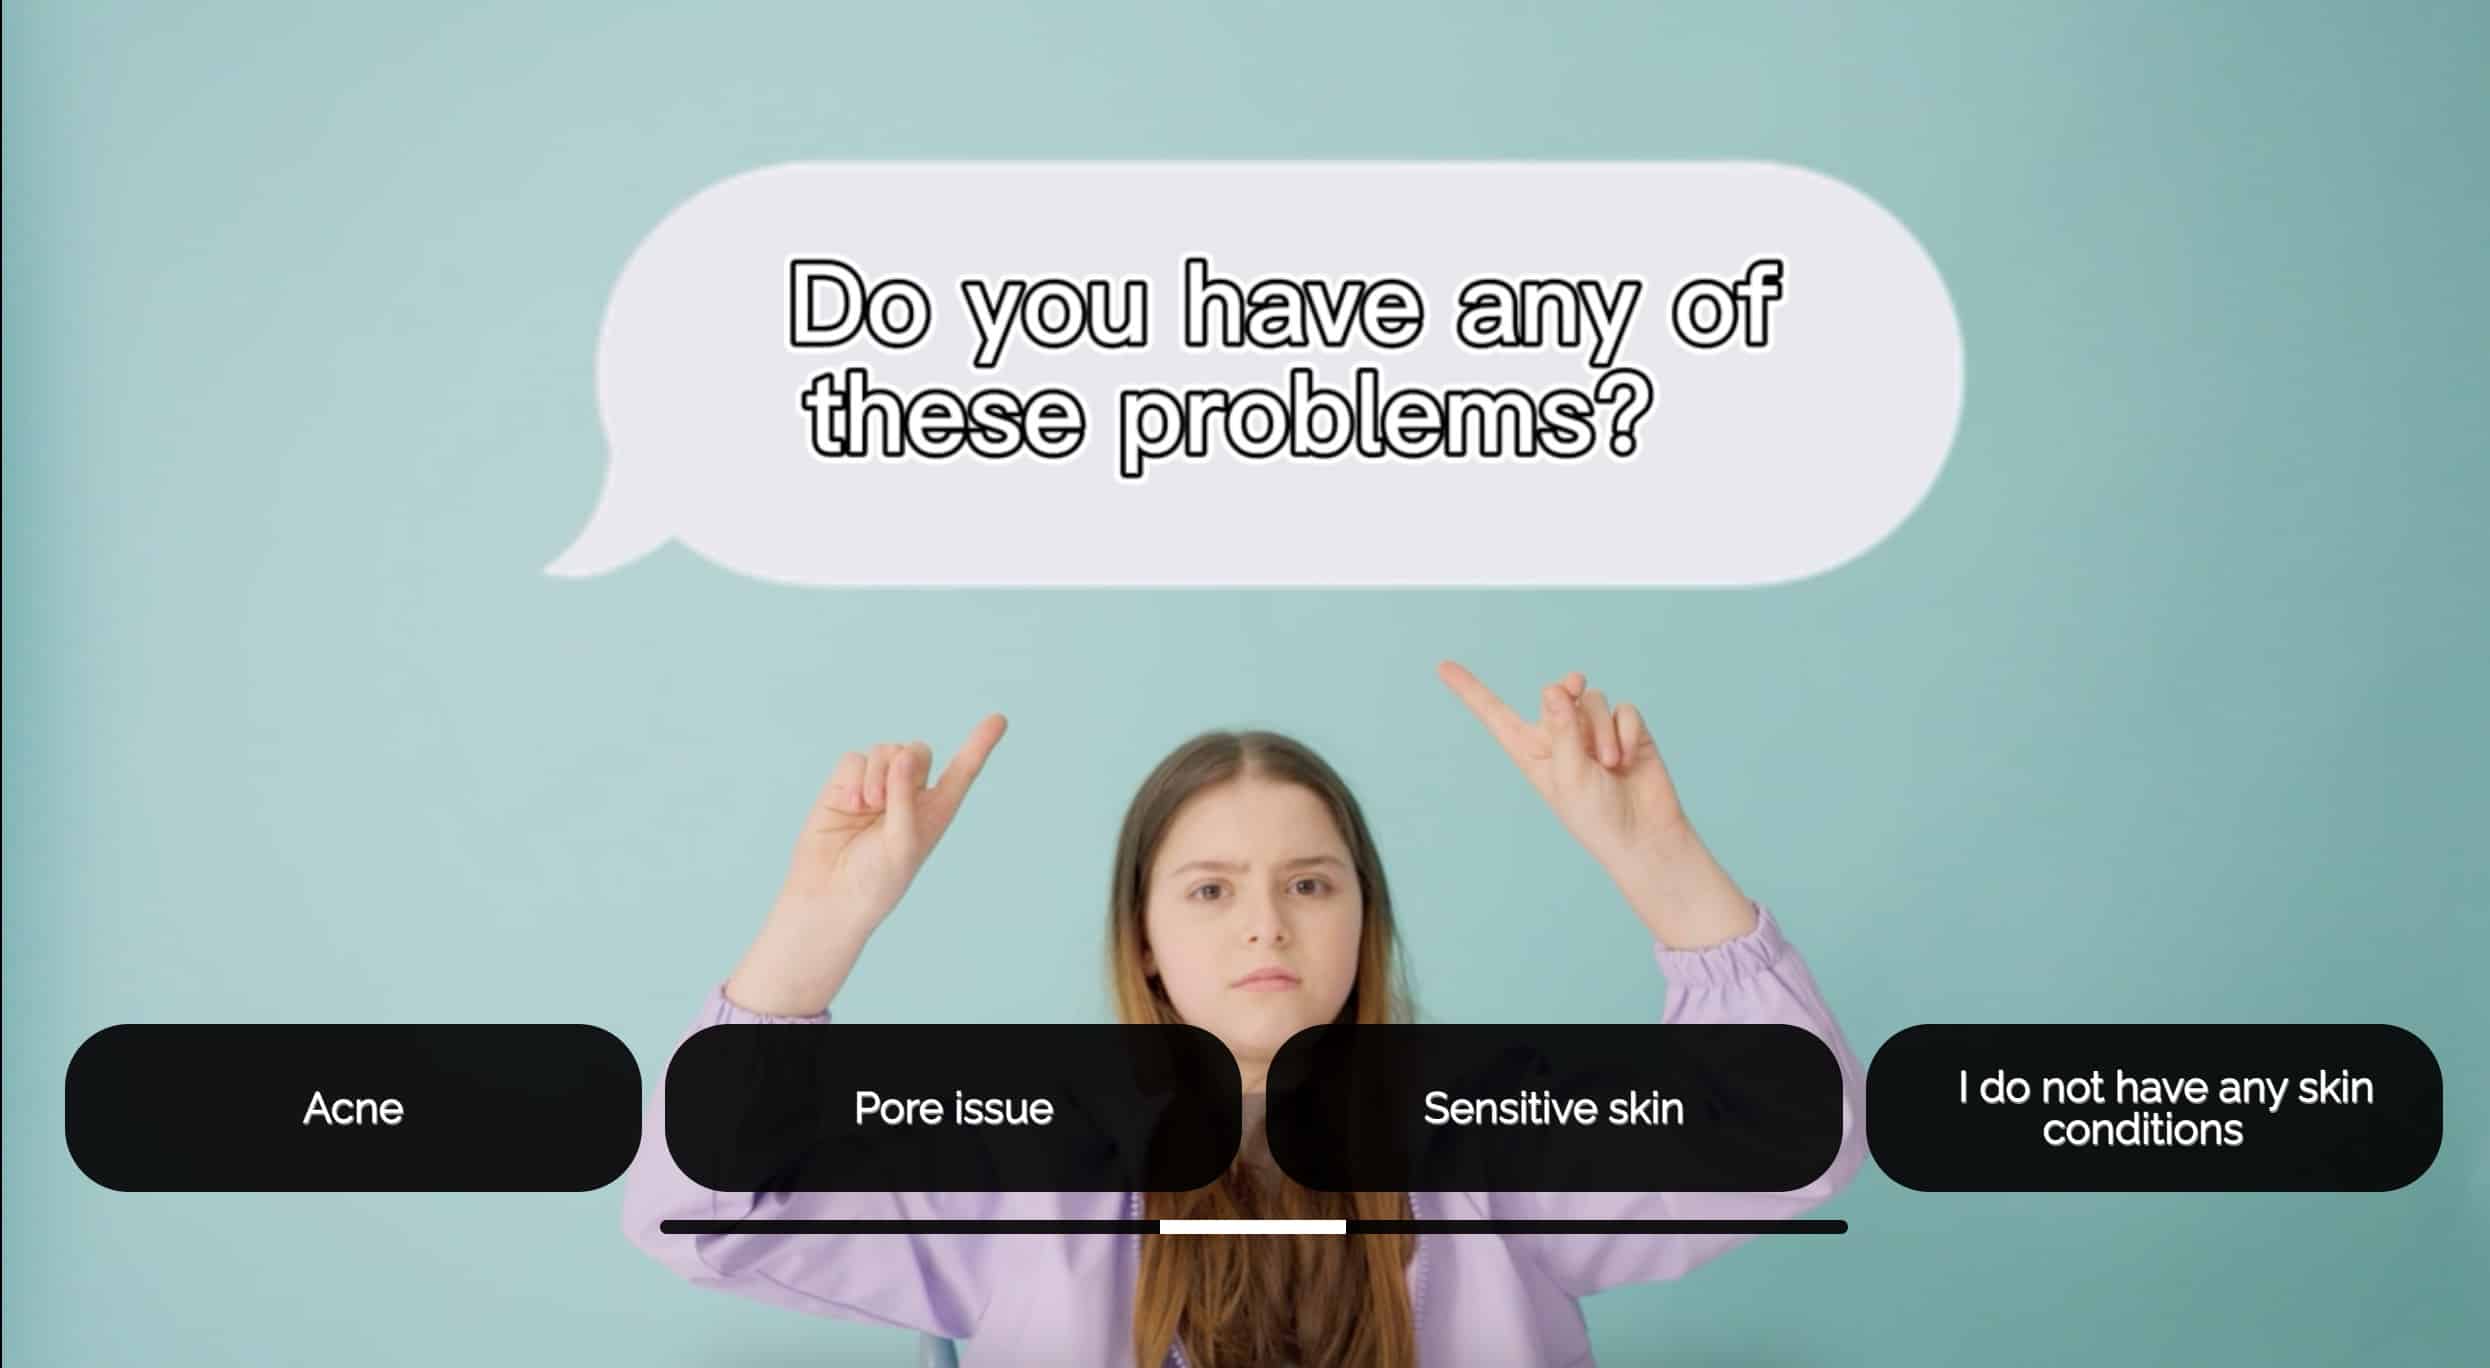 A screenshot from a student video - a girl in a purple top points to a speech bubble that reads "do you have any of these problems?". Below, in black boxes, are the choices: "Acne, Pore Issues, Sensitive Skin, I don't have skin conditions"